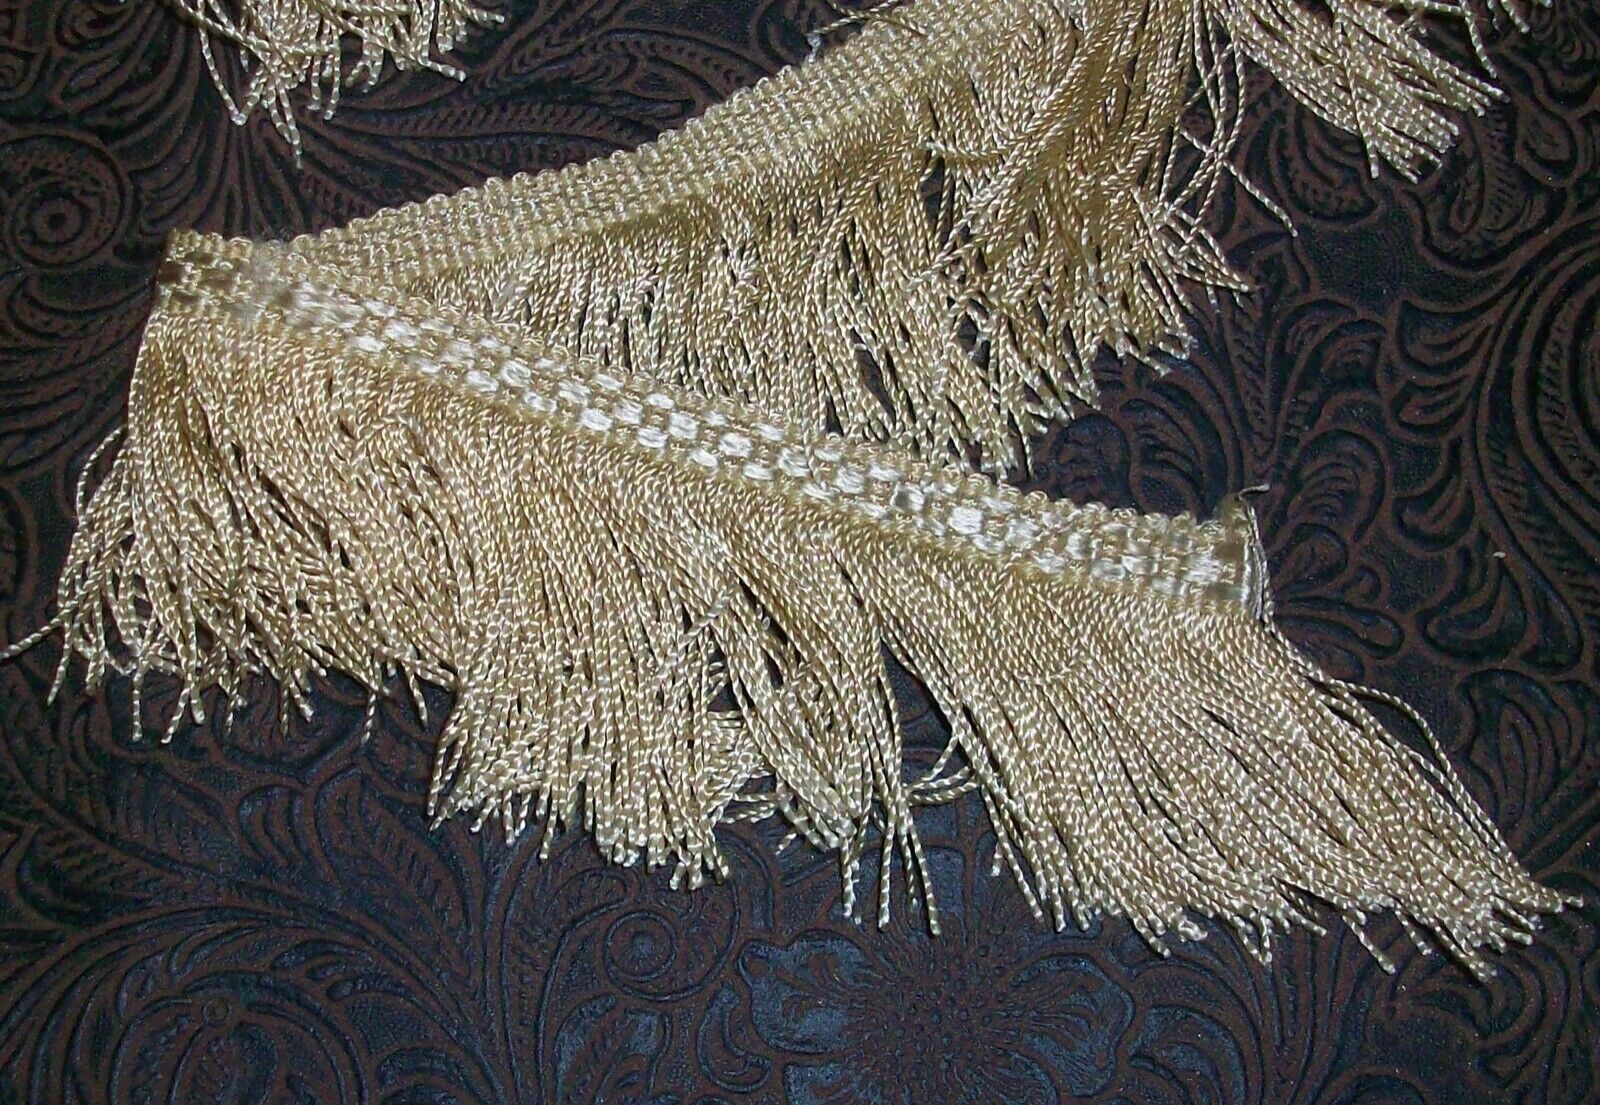 Reclaimed Antique 1920s Ivory Silk Fringe Trim 66 inches